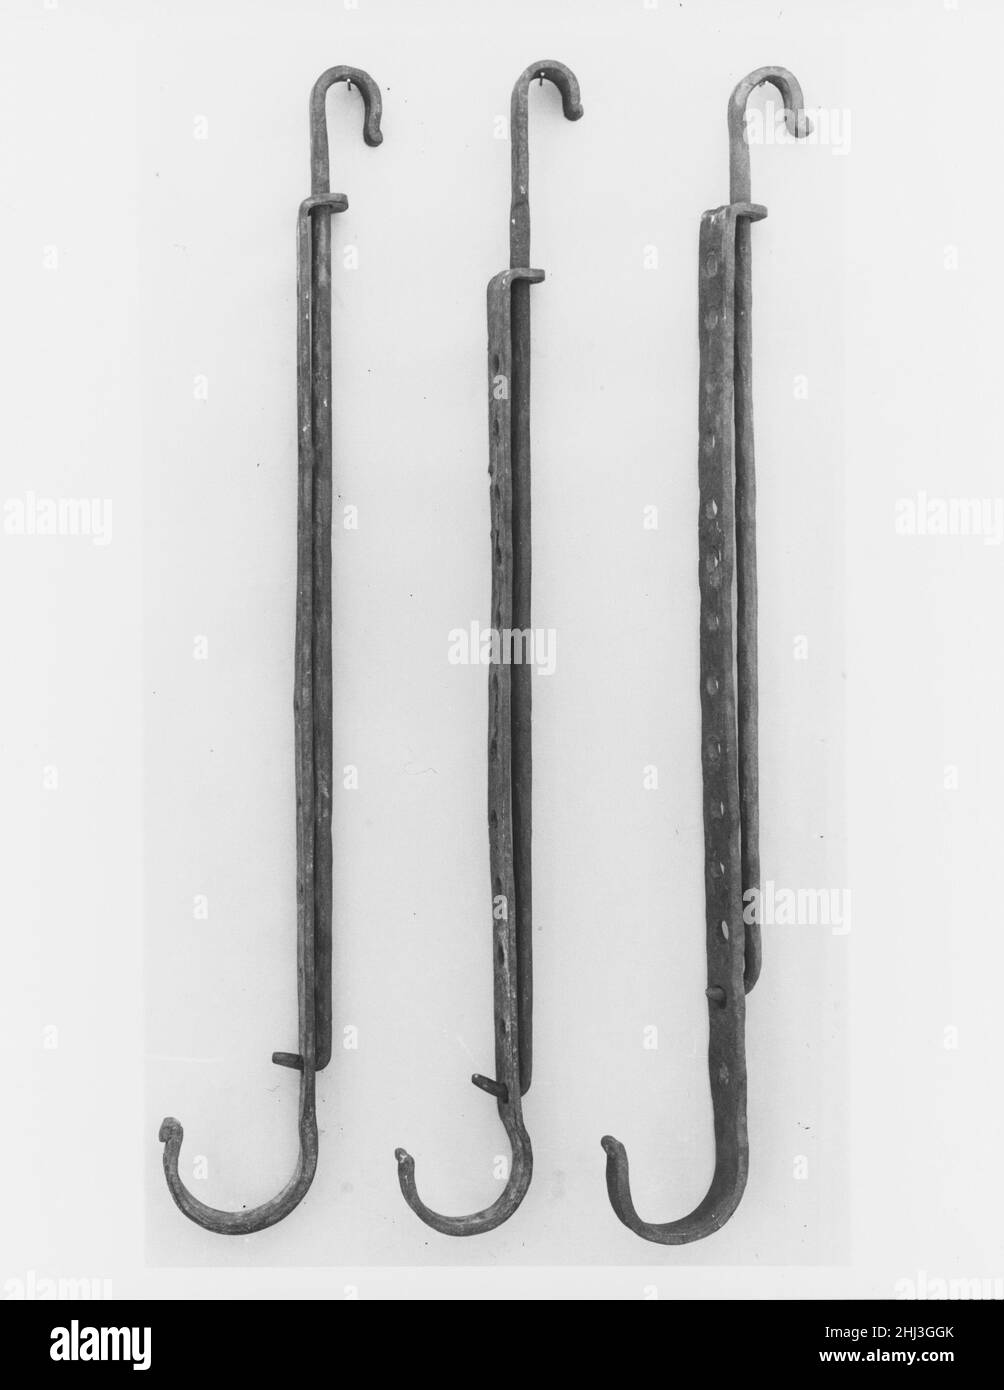 Trammel 18th century The trammel allowed a cook to adjust the cooking temperature by either raising or lowering vessels hanging above the fire. The tool consists of two permanently joined hooks that slide vertically and lock into place at frequent intervals. The device would be suspended from a lug pole placed high inside the fireplace.. Trammel  8769 Stock Photo